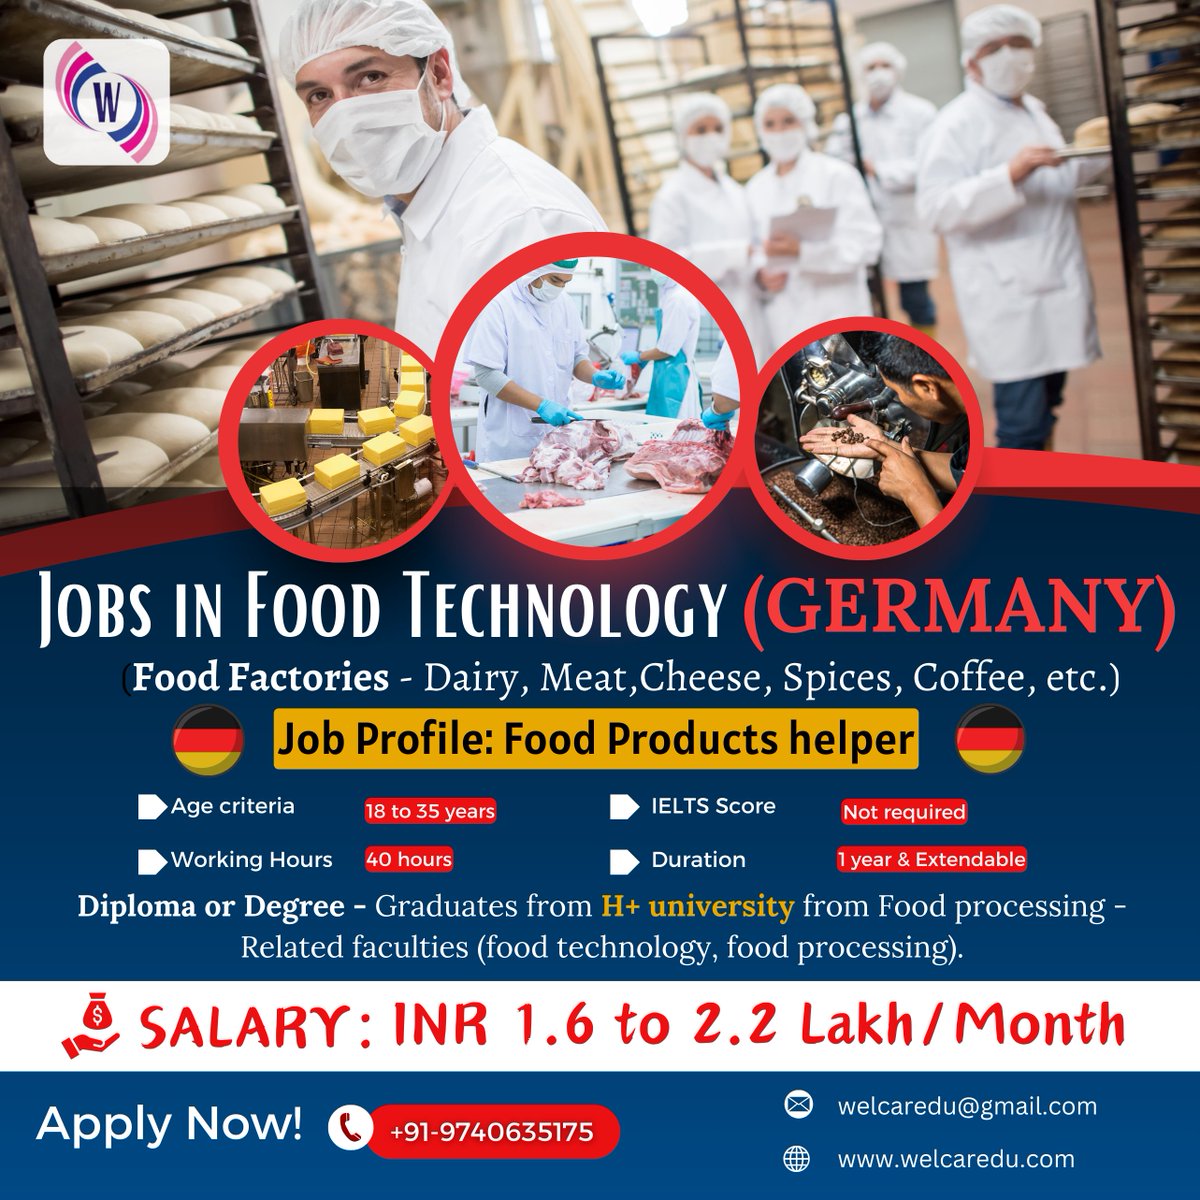 Food Technology Jobs in Germany. You can reach us at +91 9035340481 (WhatsApp) for more information. #TasteInnovation #CareerPath
#FoodIndustryJobs #TechJobsGermany #FoodTechCareer #FutureofFlavor #GermanyJobs #technology #food #germany #job #welcareoverseas #drnareshbhati